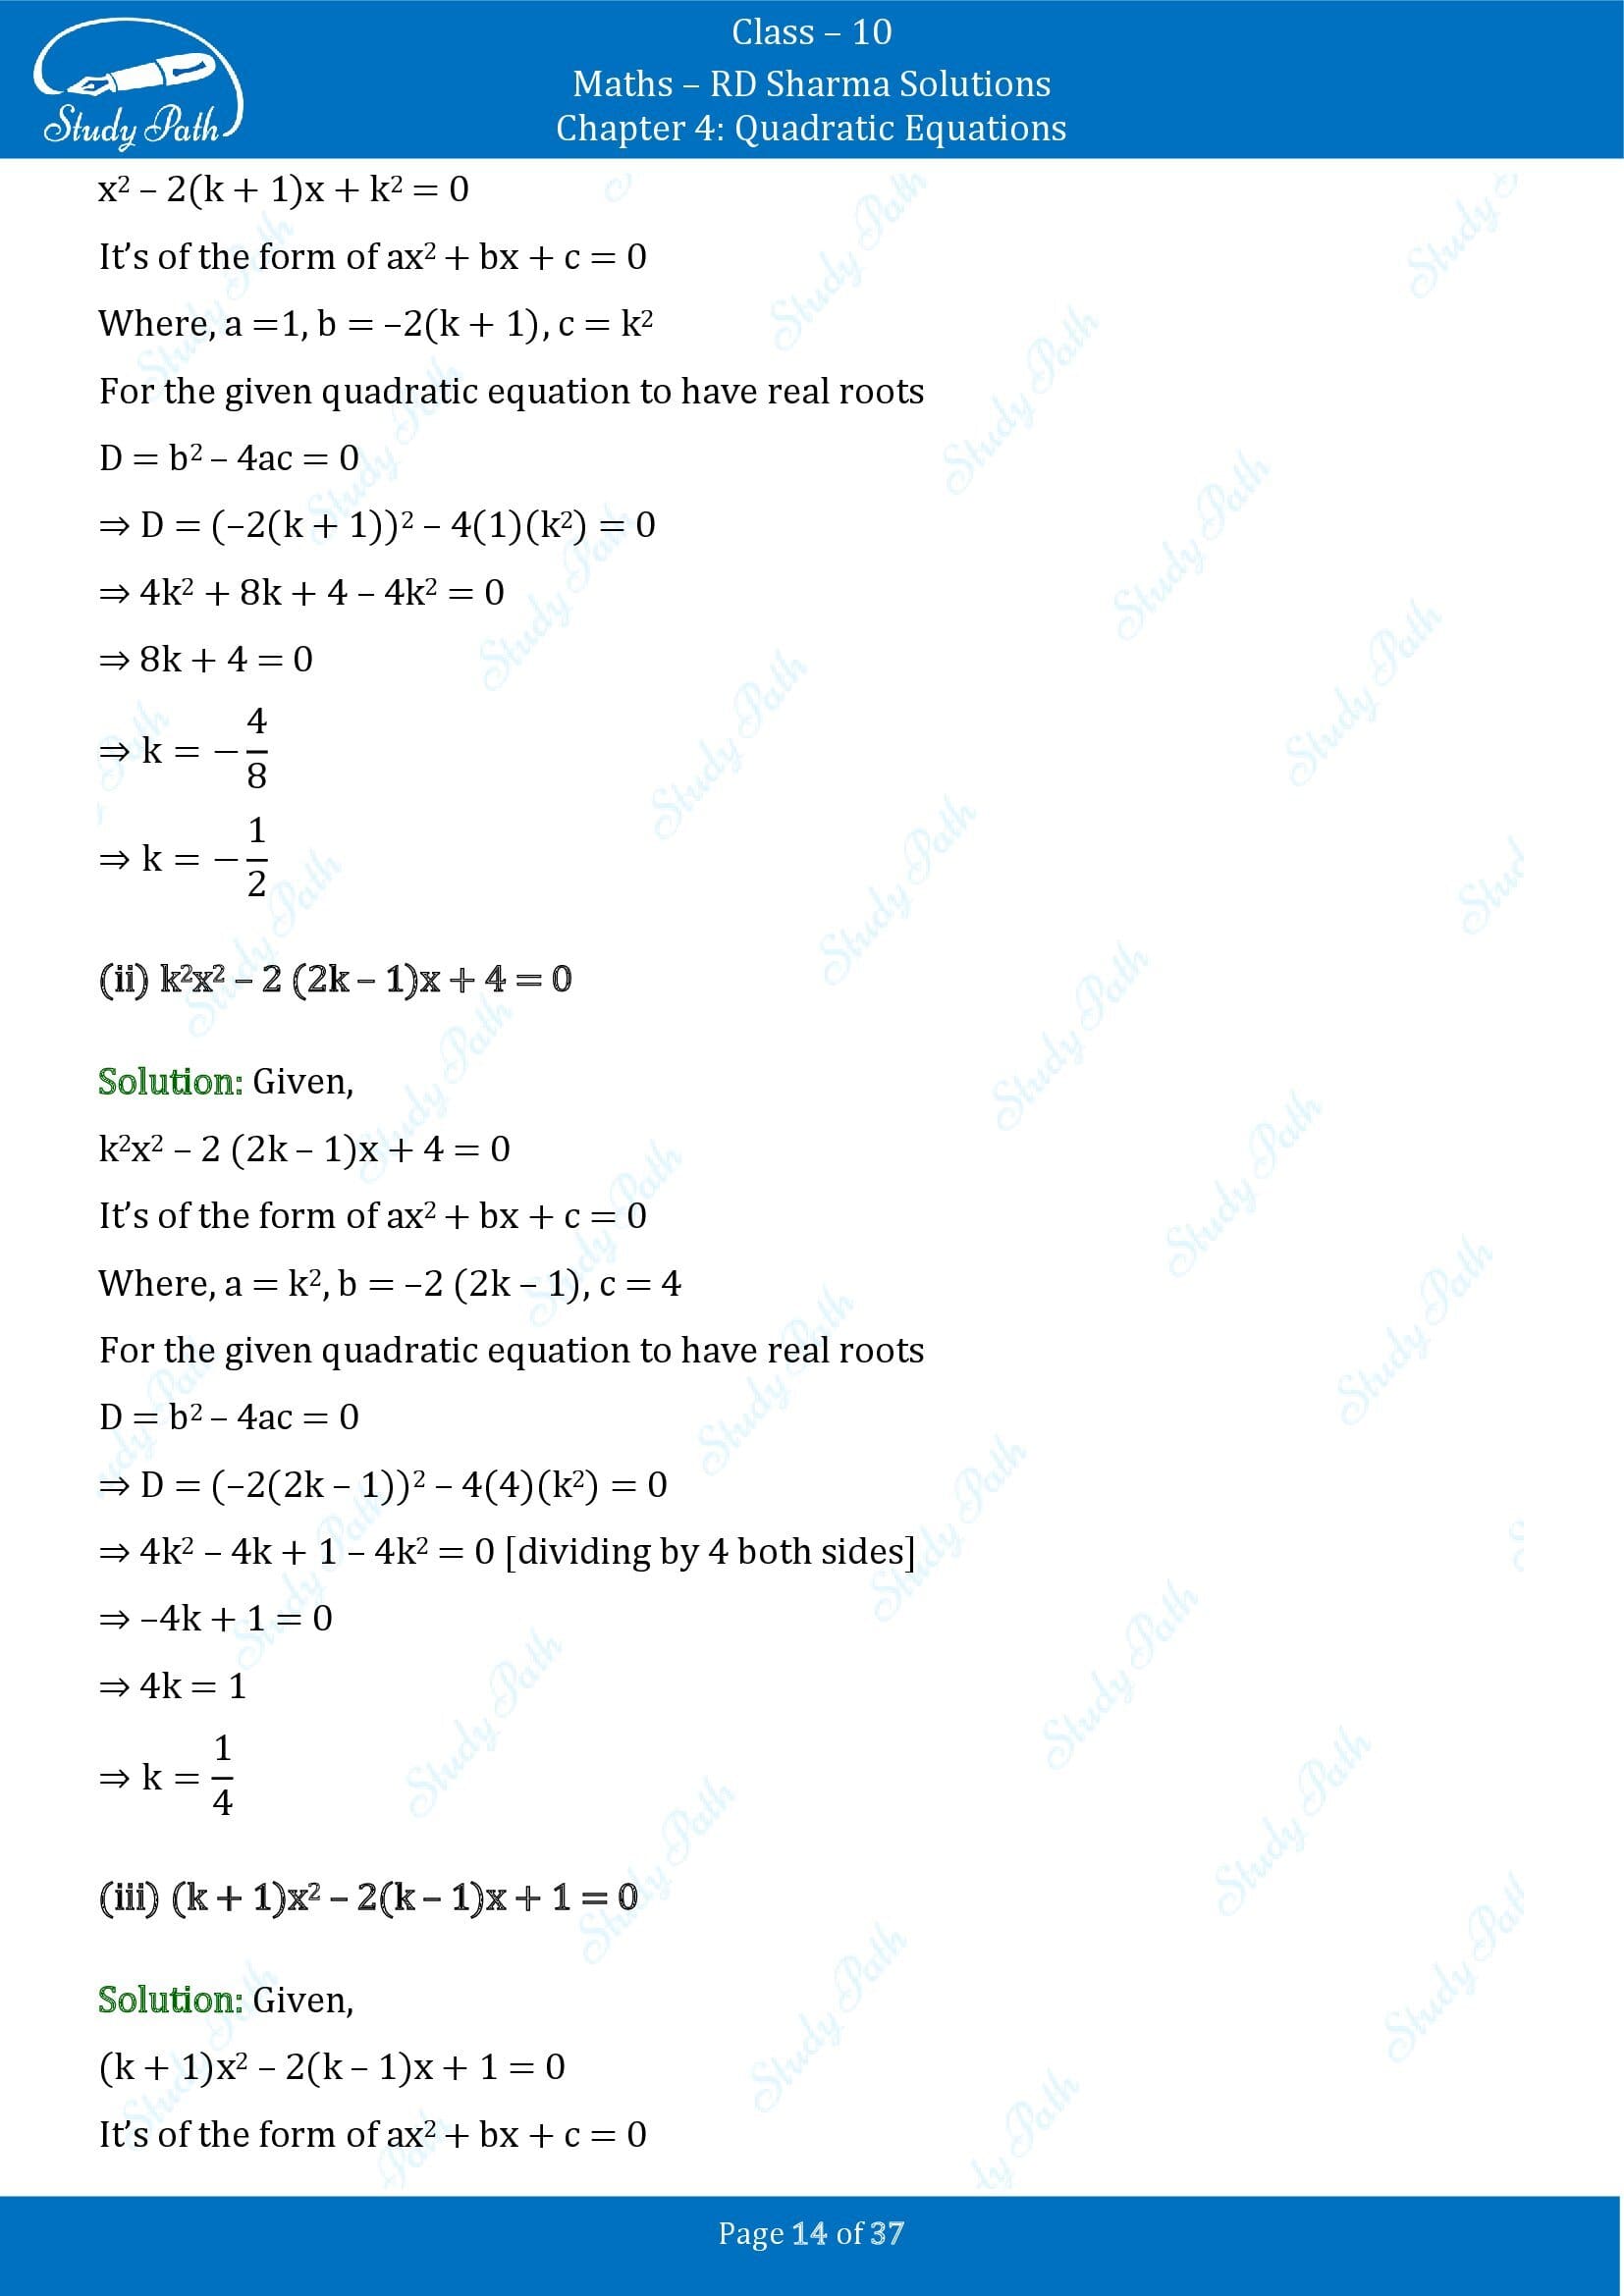 RD Sharma Solutions Class 10 Chapter 4 Quadratic Equations Exercise 4.6 00014